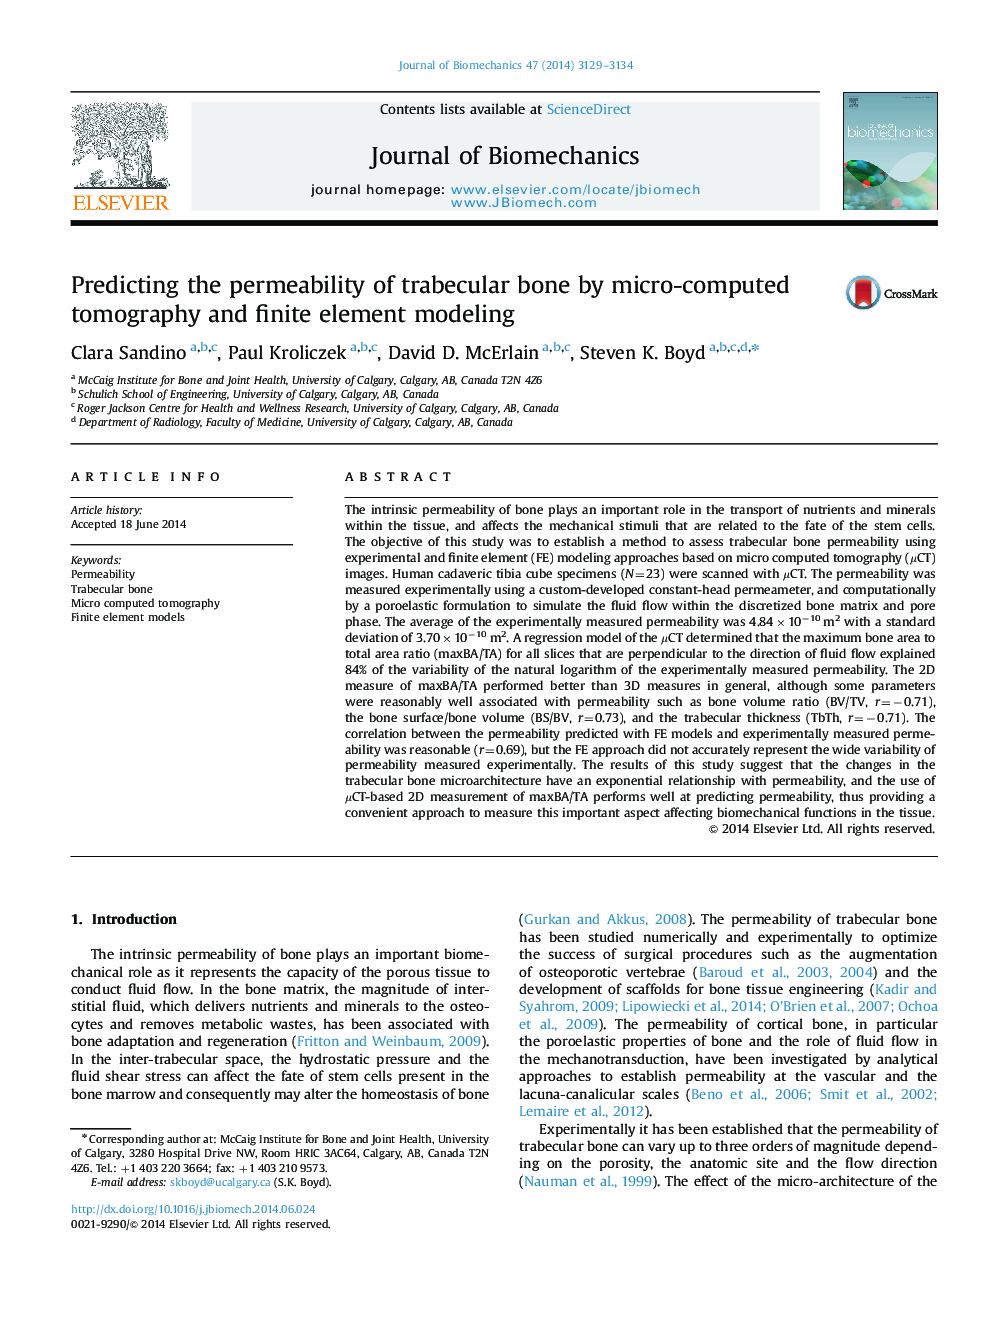 Predicting the permeability of trabecular bone by micro-computed tomography and finite element modeling